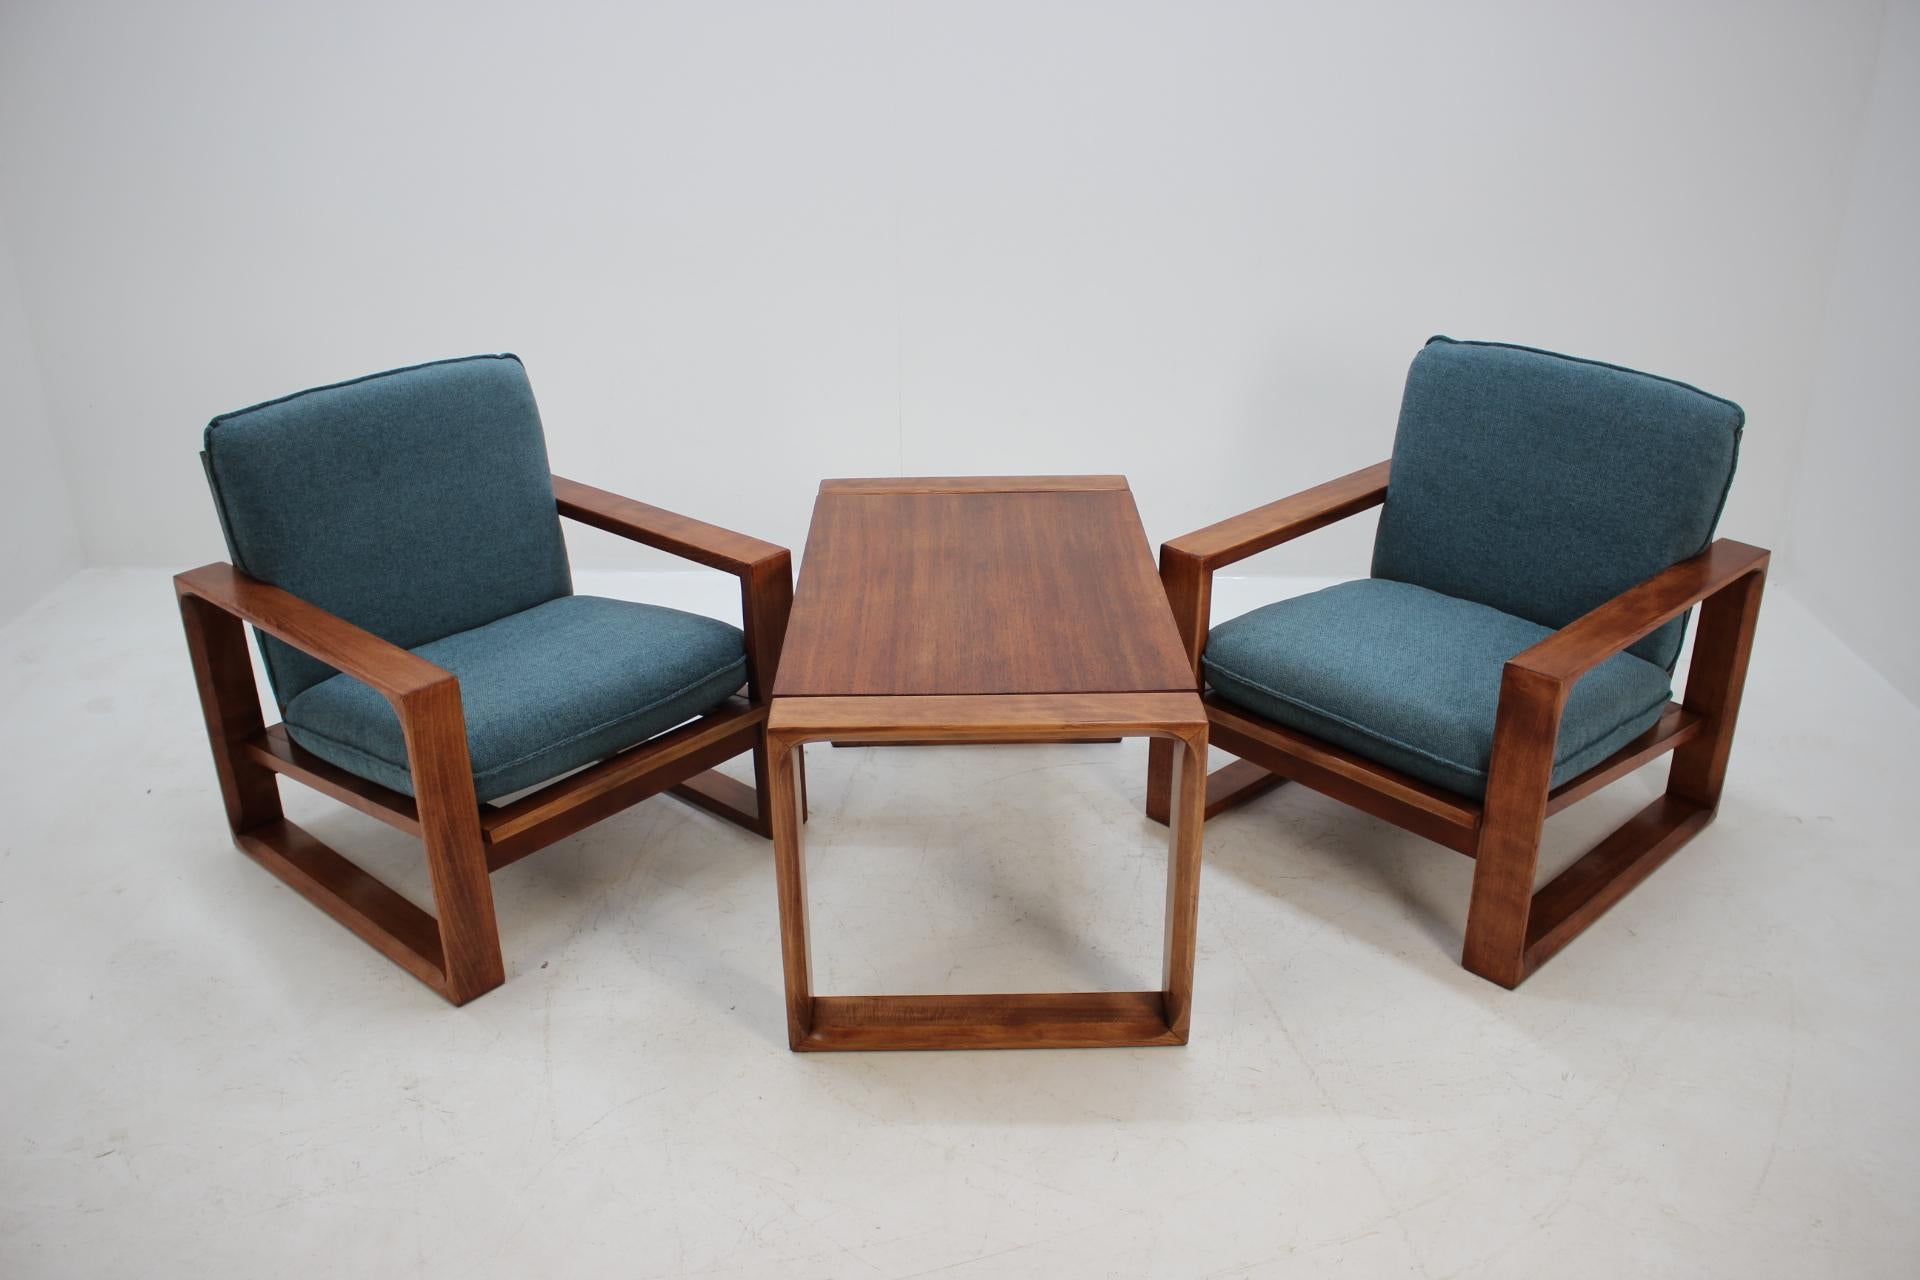 Made in Czechoslovakia. Set of two chairs and coffee table. Newly upholstered. Carefully refurbished. Dimensions of the coffee table height 50cm, width 90cm, depth 55cm.